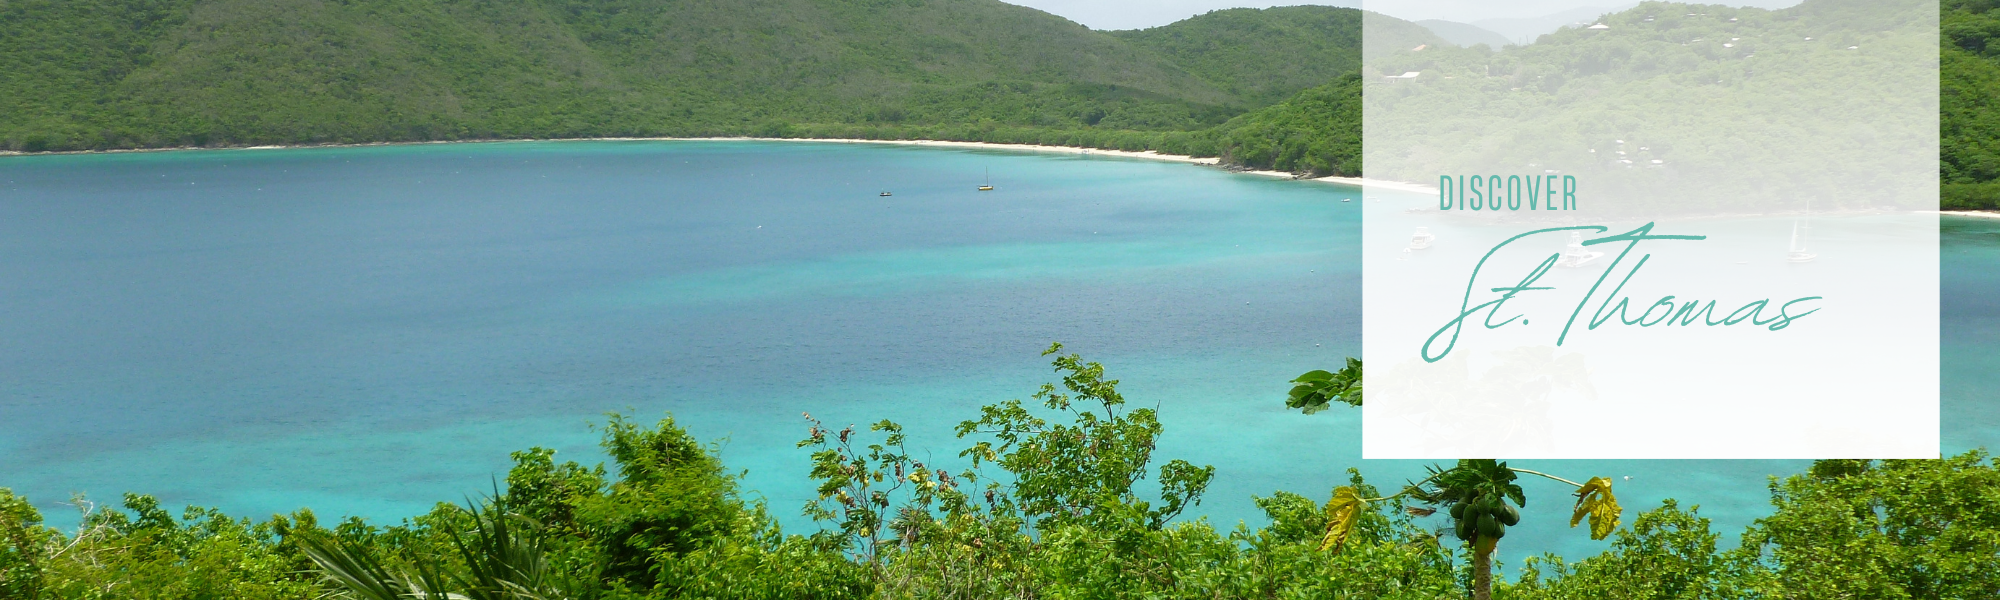 discover St. Martin